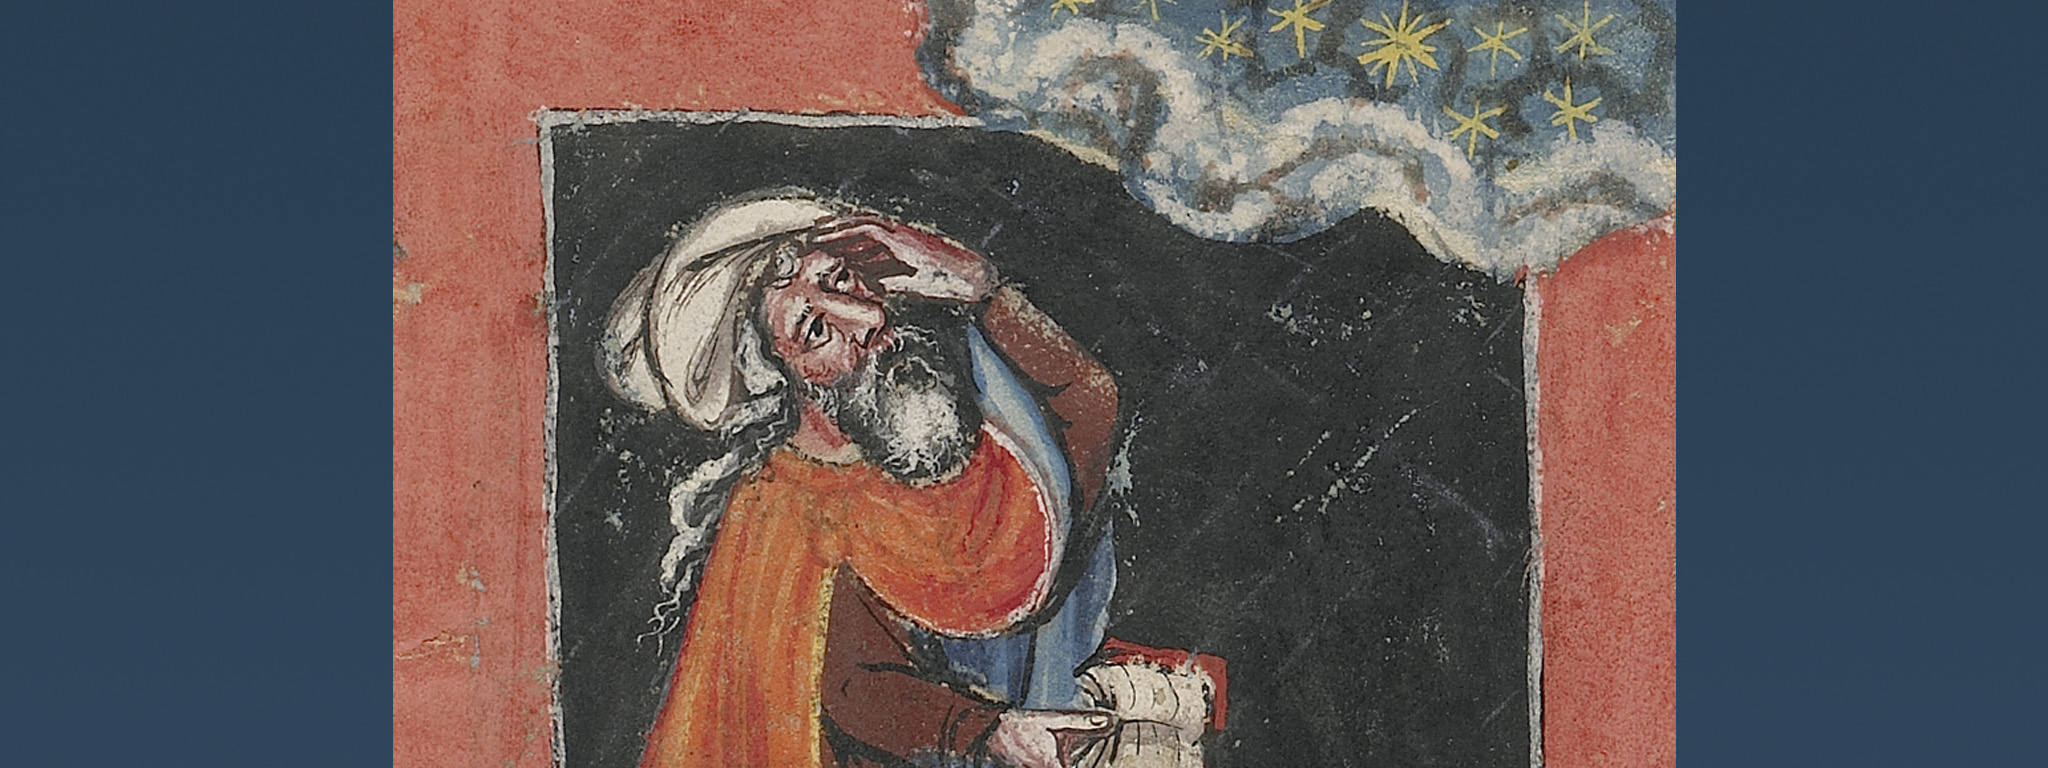 Jonicus, the First Astronomer, from World Chronicle (text in German), Regensburg, Bavaria, about 1400-1410, artist unknown; author, Rudolf von Ems. The J. Paul Getty Museum